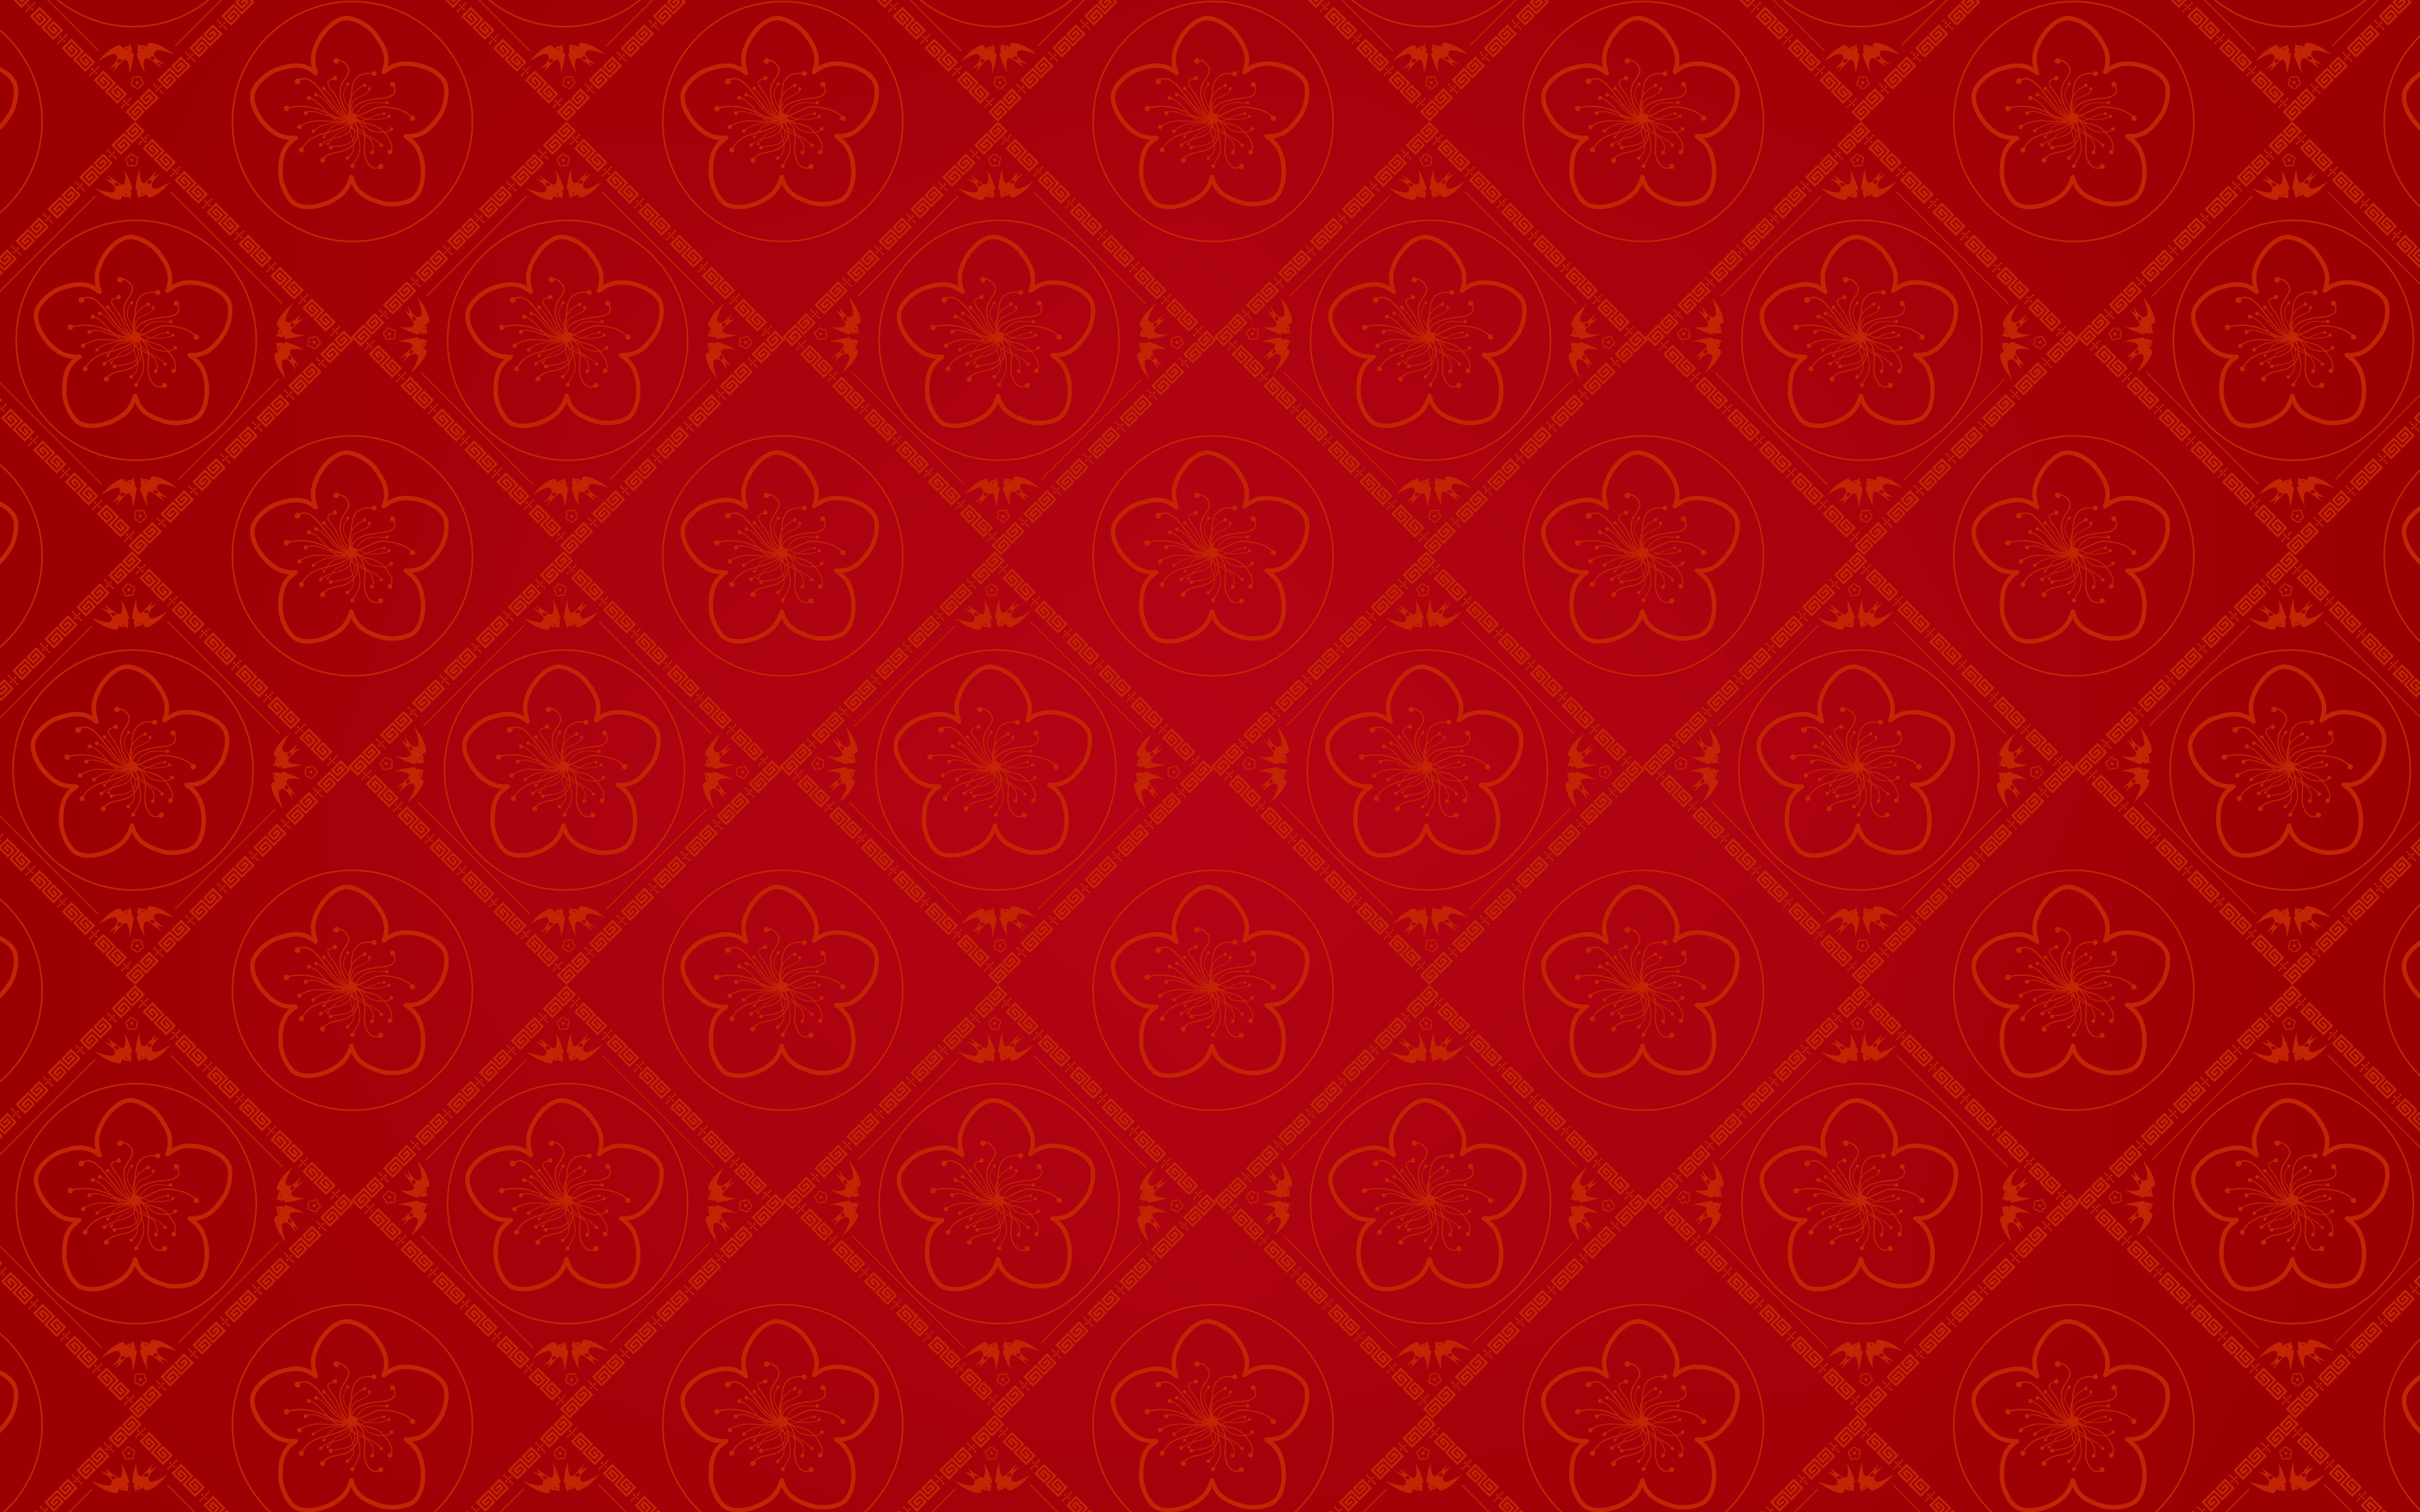 Download wallpaper red chinese background, 4k, chinese